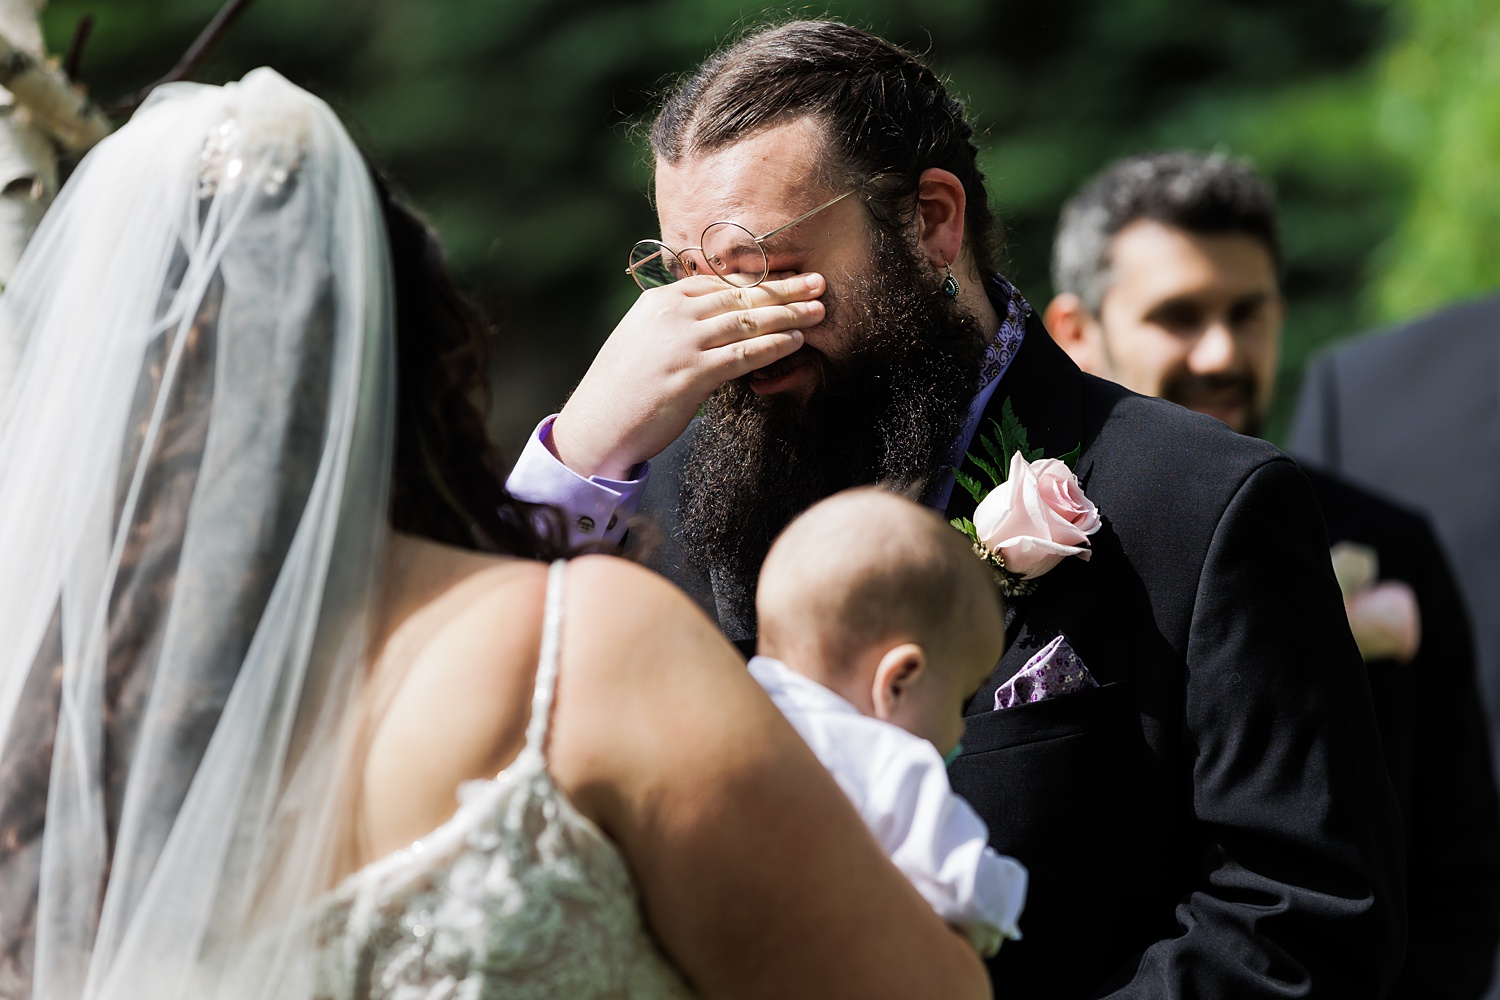 The groom tears up reading his vows during the ceremony